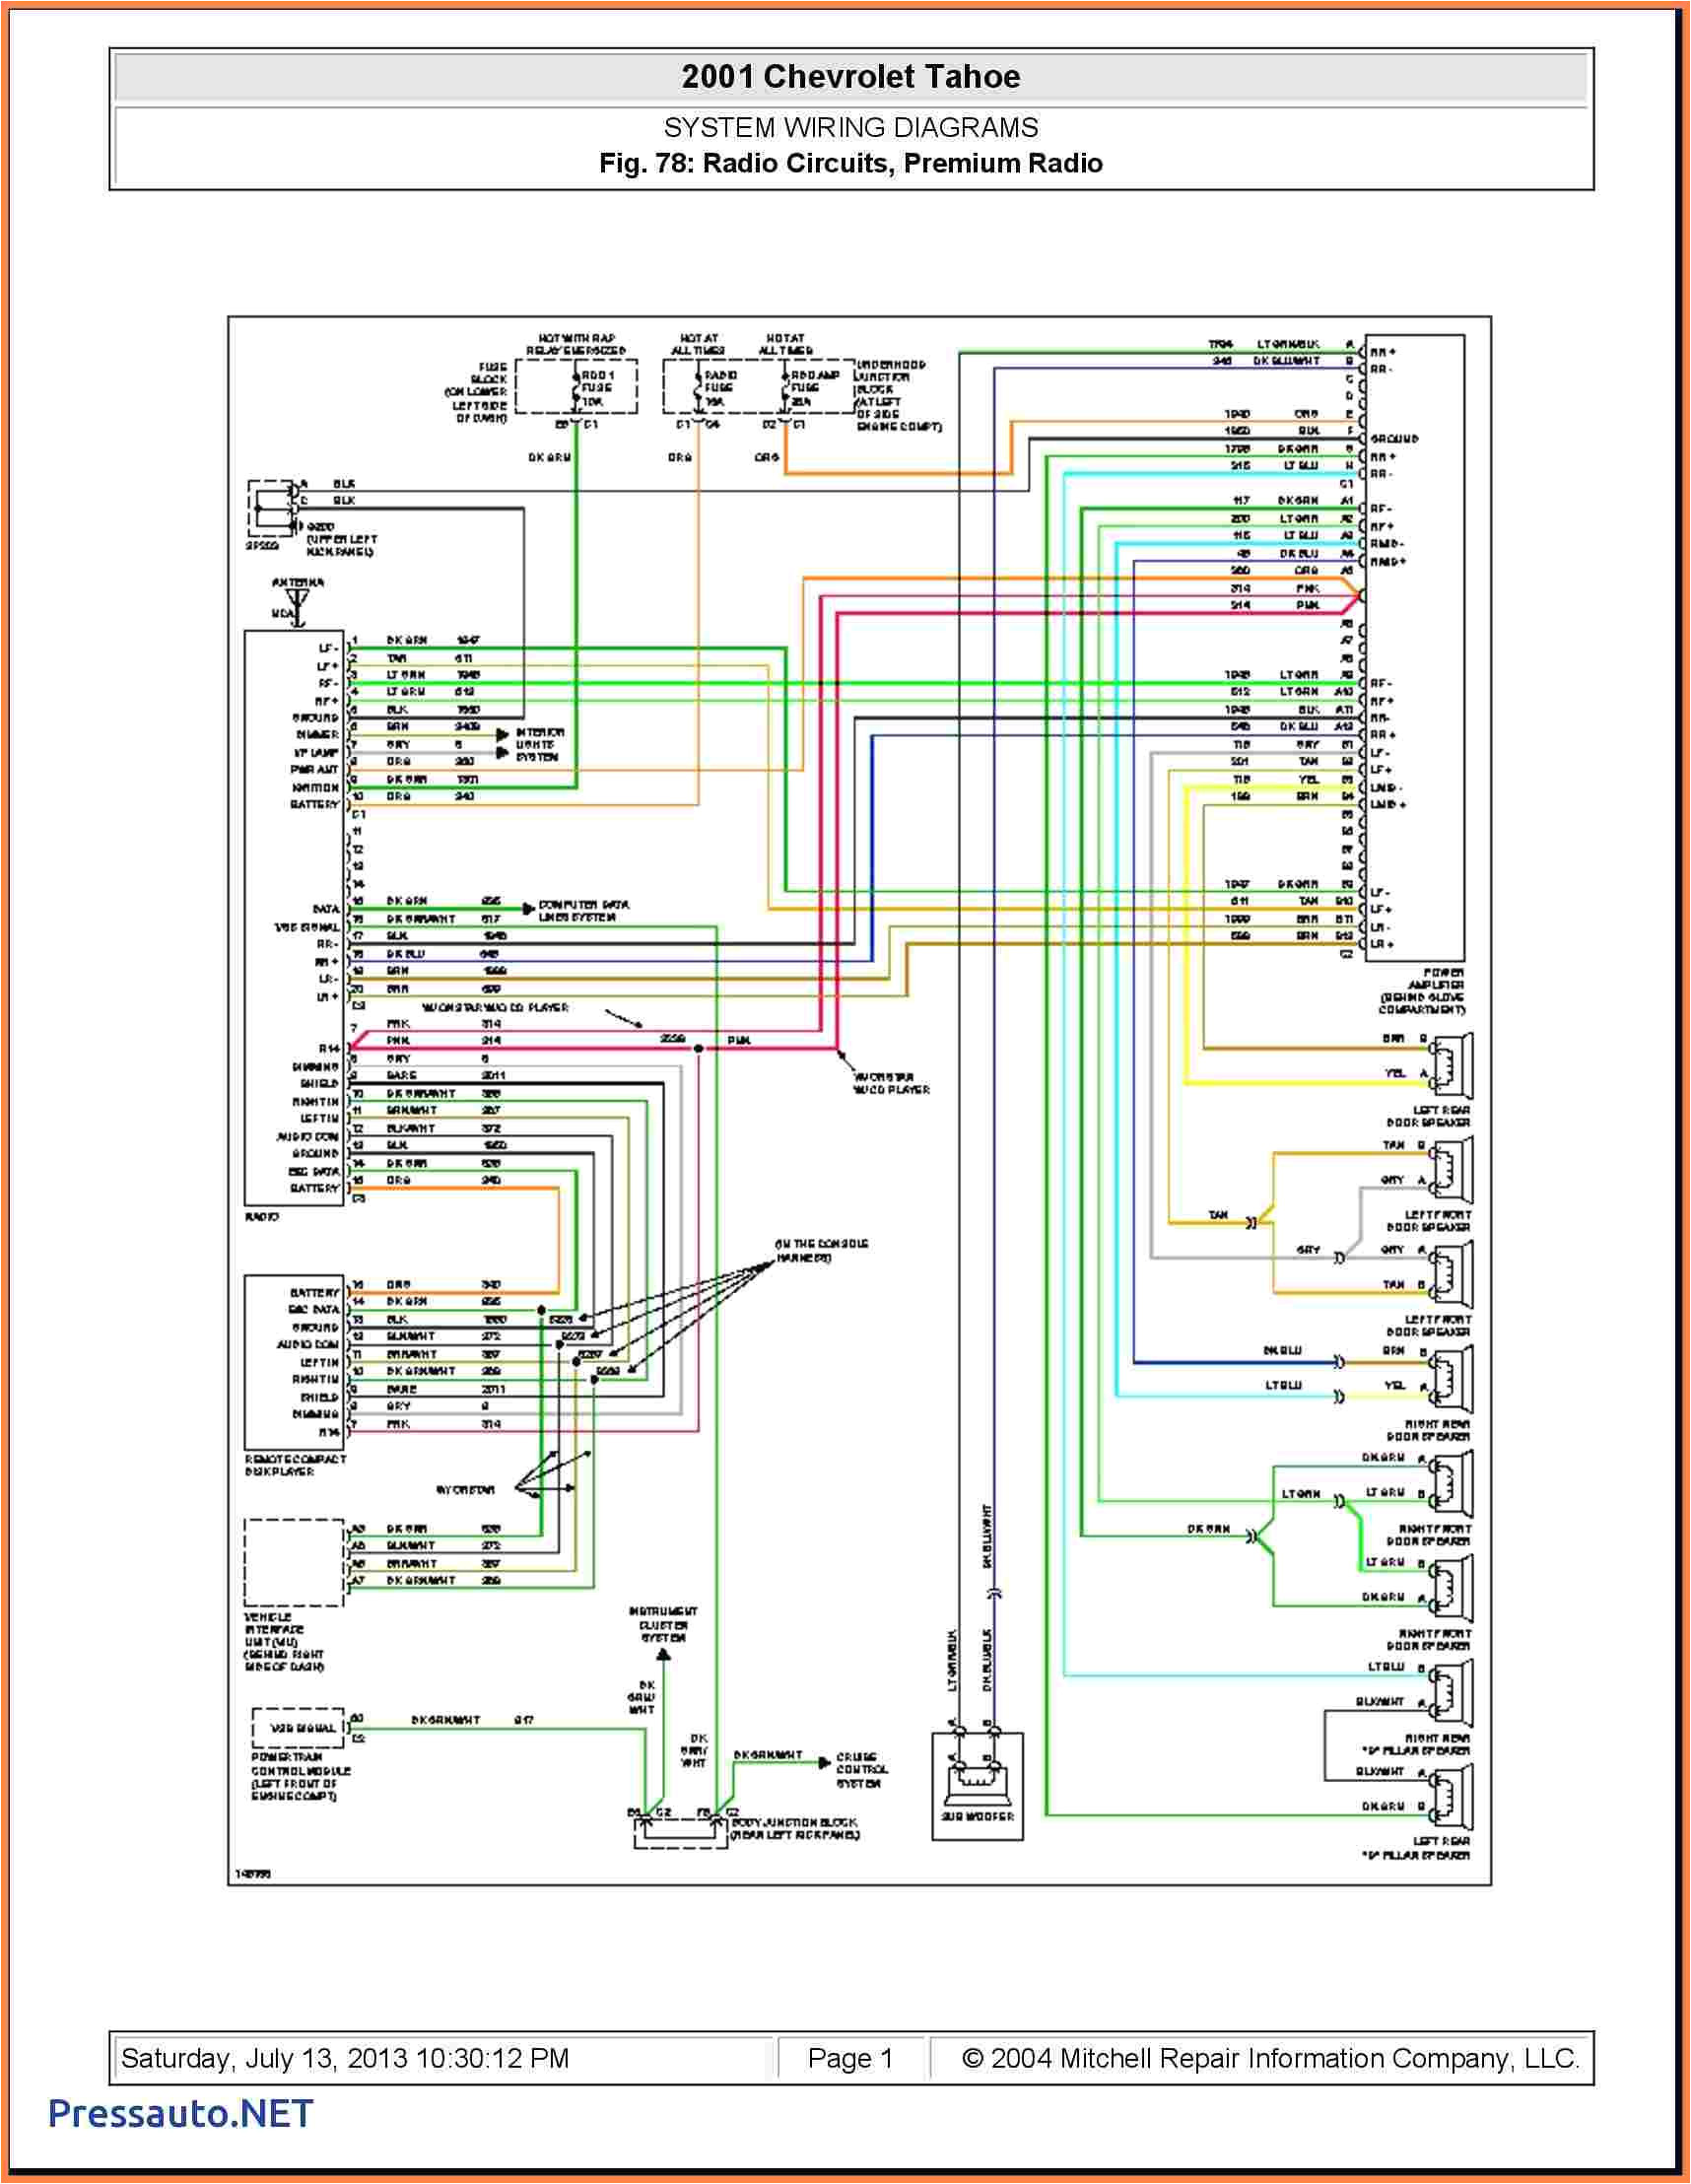 wiring diagram for 2004 chevy avalanche get free image about wiring chevy factory radio wiring color diagram get free image about wiring